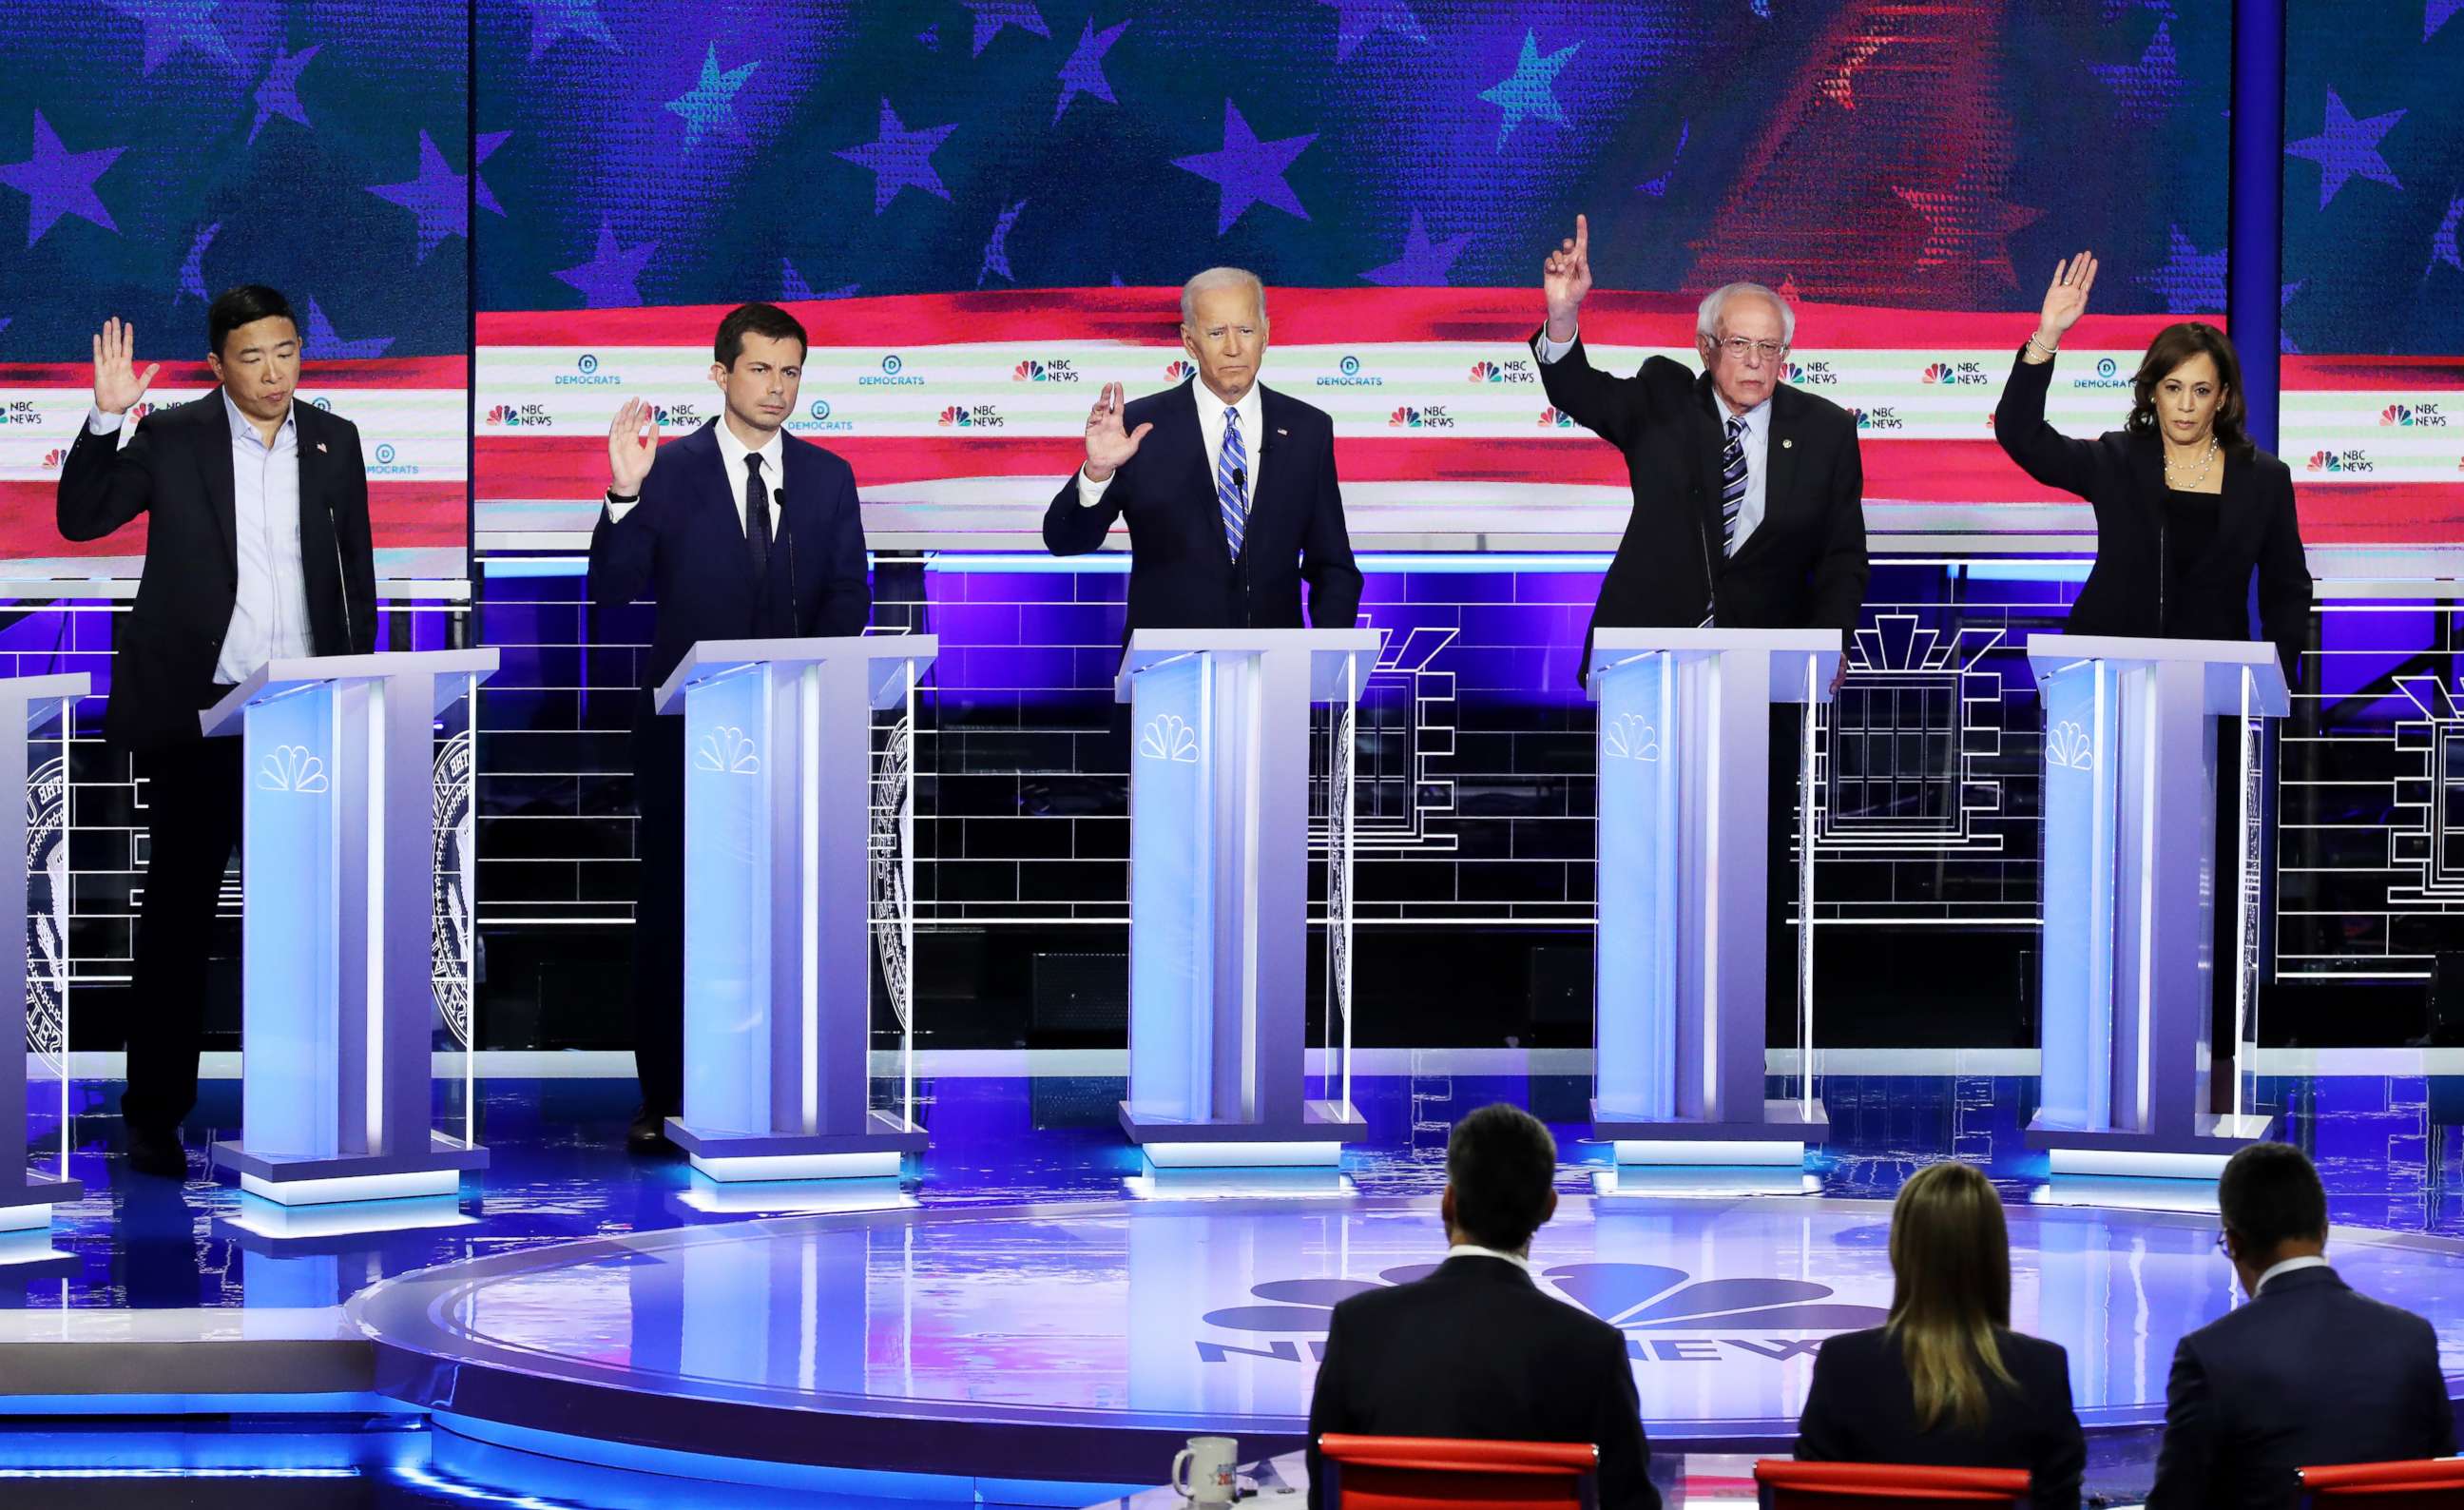 PHOTO: Democratic presidential candidates raise their hands during the second night of the first Democratic presidential debate on June 27, 2019 in Miami, Florida.